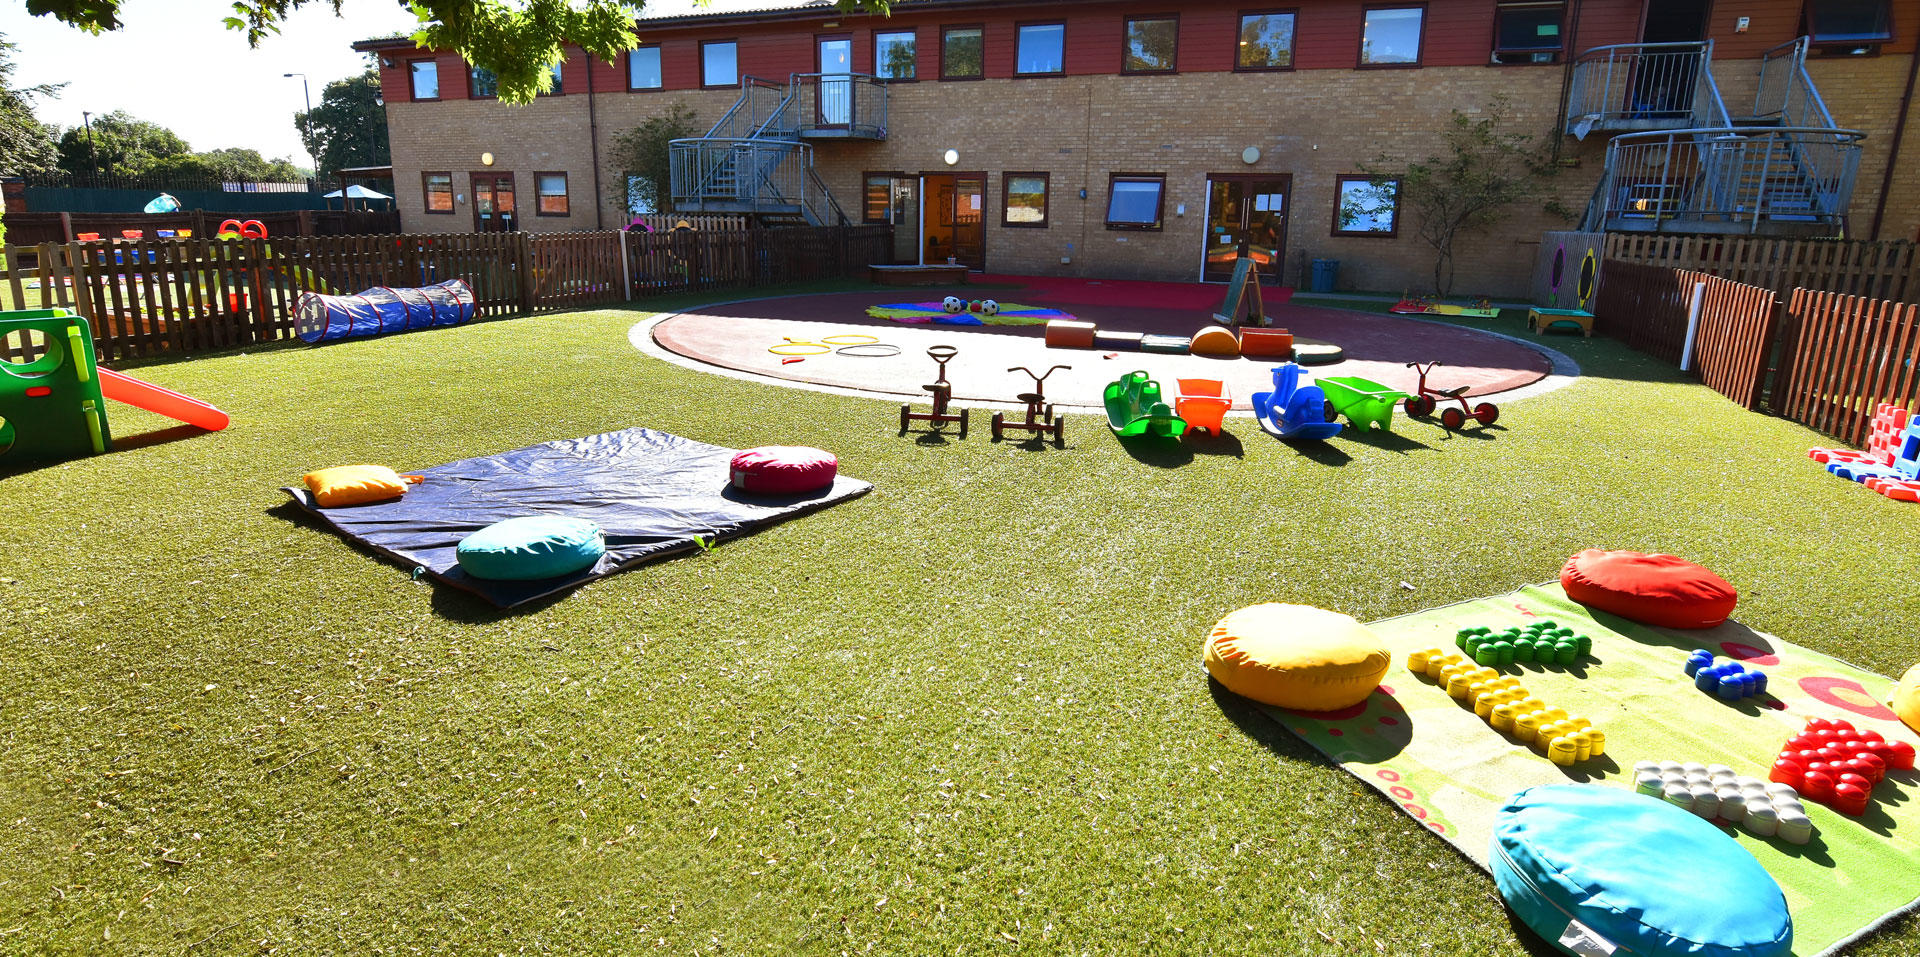 Images Bright Horizons Tooting Looking Glass Day Nursery and Preschool